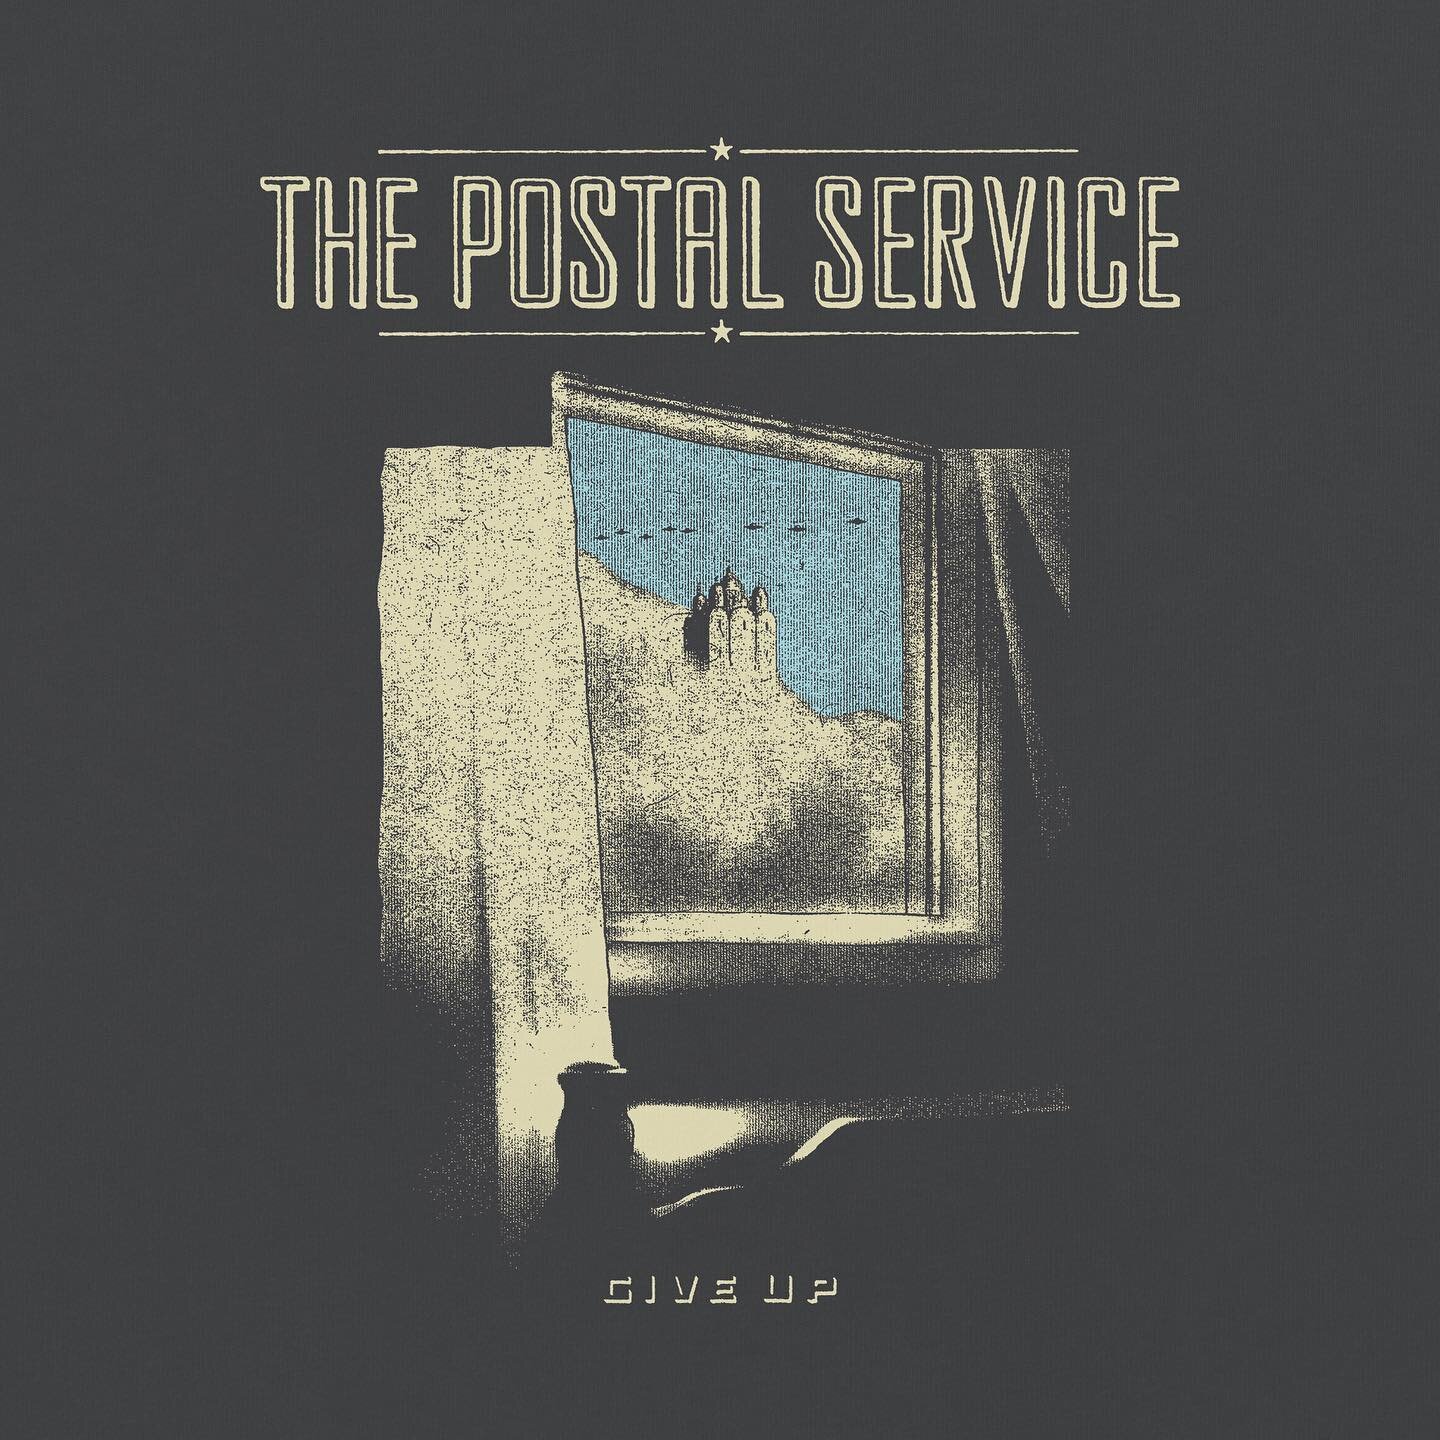 The Postal Service - &lsquo;Give Up&rsquo; Reimagined

Along with Death Cab for Cutie&rsquo;s 20th album anniversary, I was asked to reimagine @postalservicemusic&rsquo;s iconic &lsquo;Give Up&rsquo; album cover for its 20th anniversary. They request